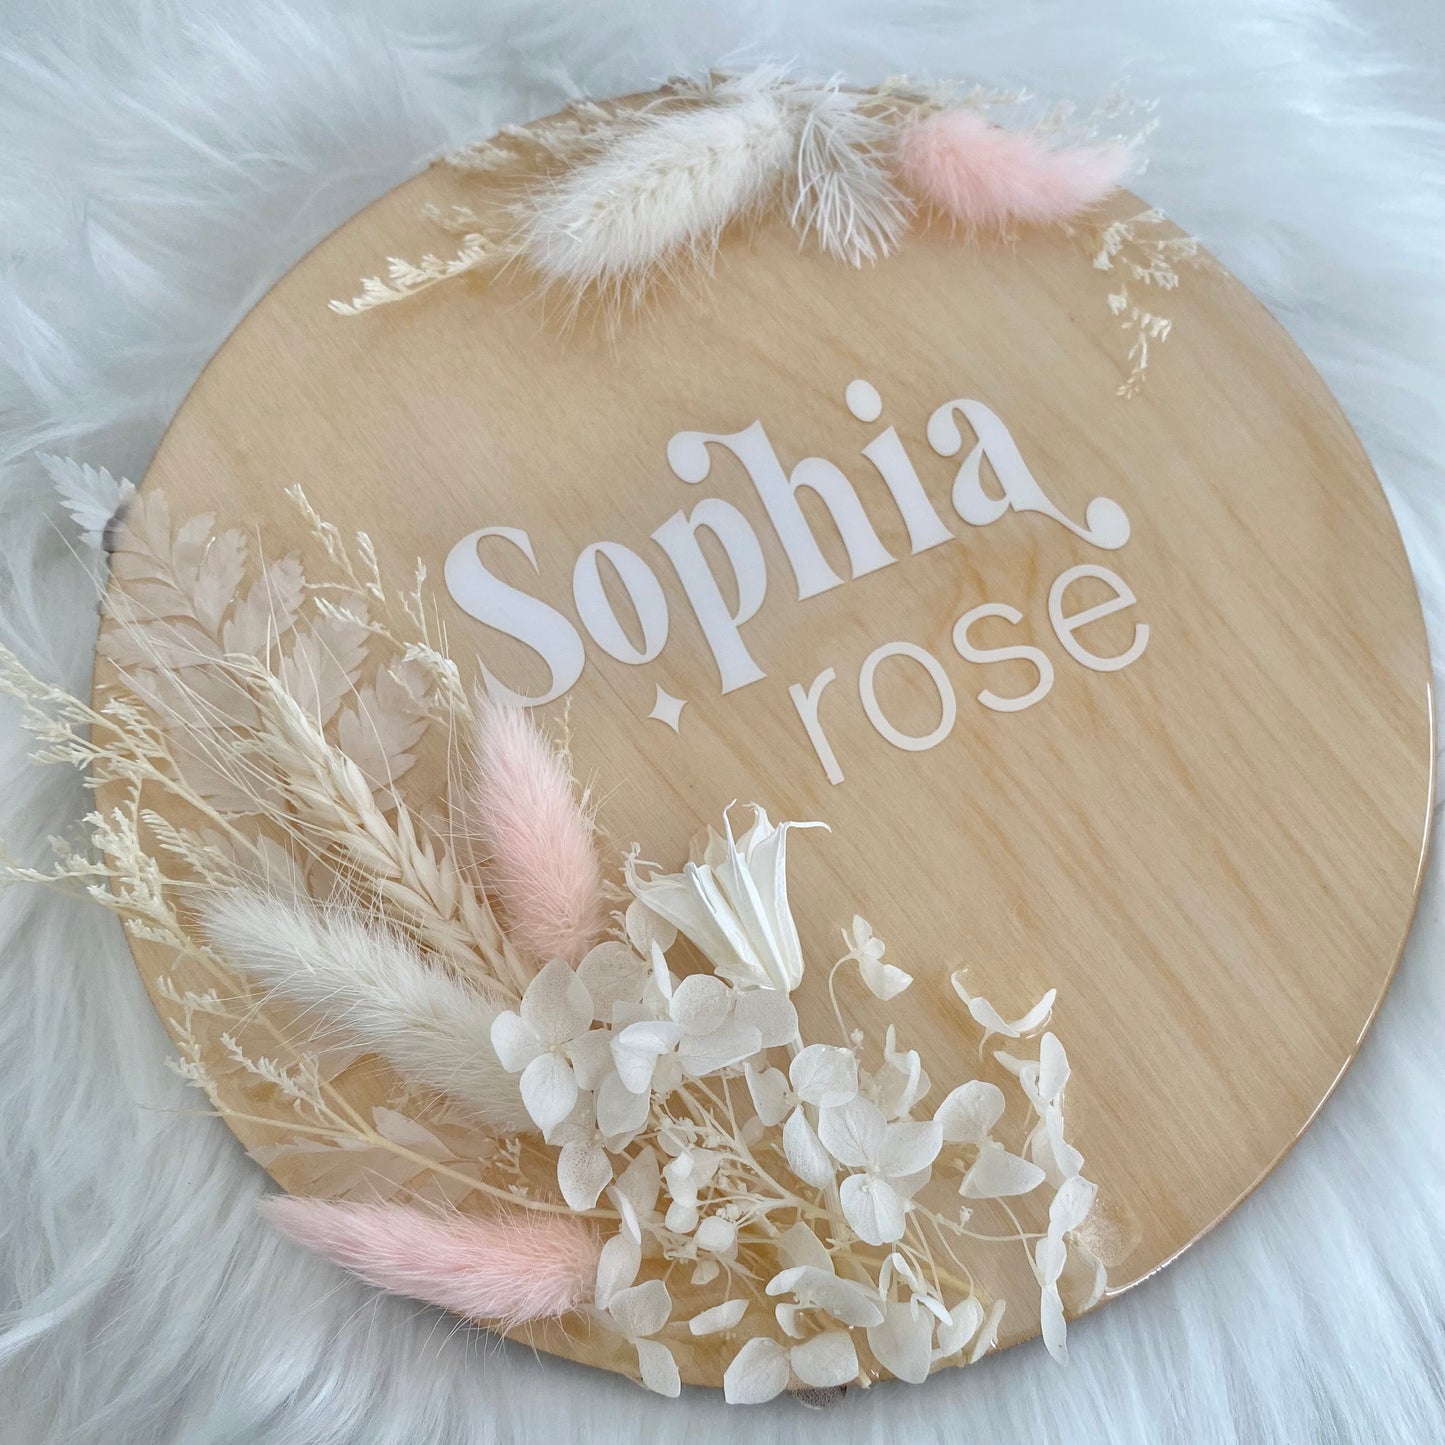 Dried Flower Bedroom Sign - Pink and White